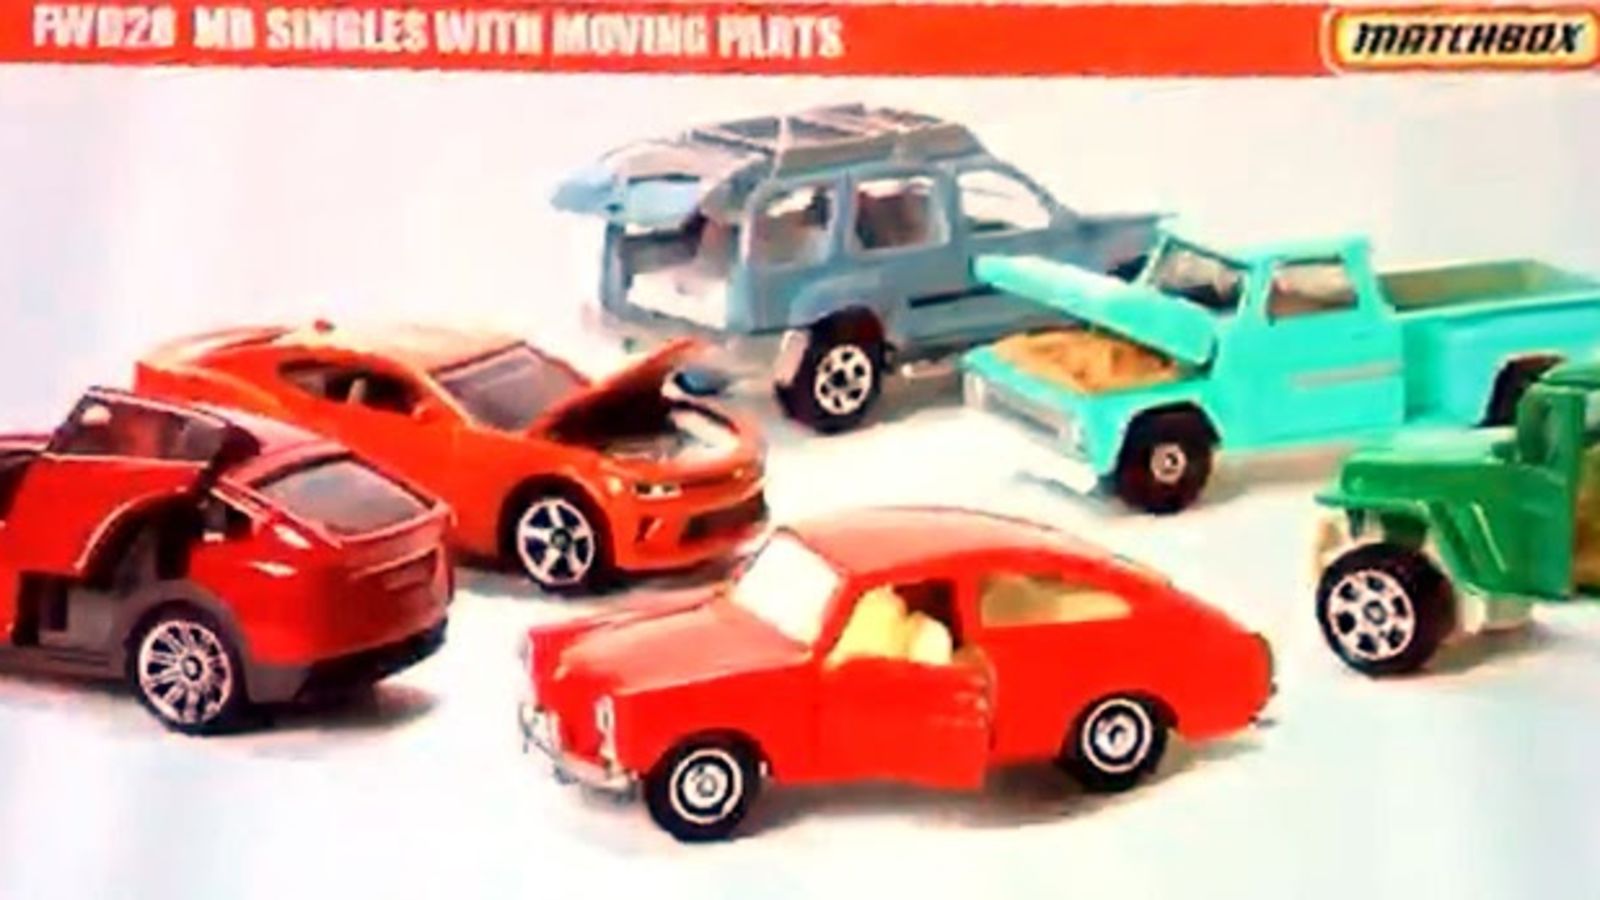 Illustration for article titled Closer look at some 2019 Matchbox models, courtesy of T-Hunted.